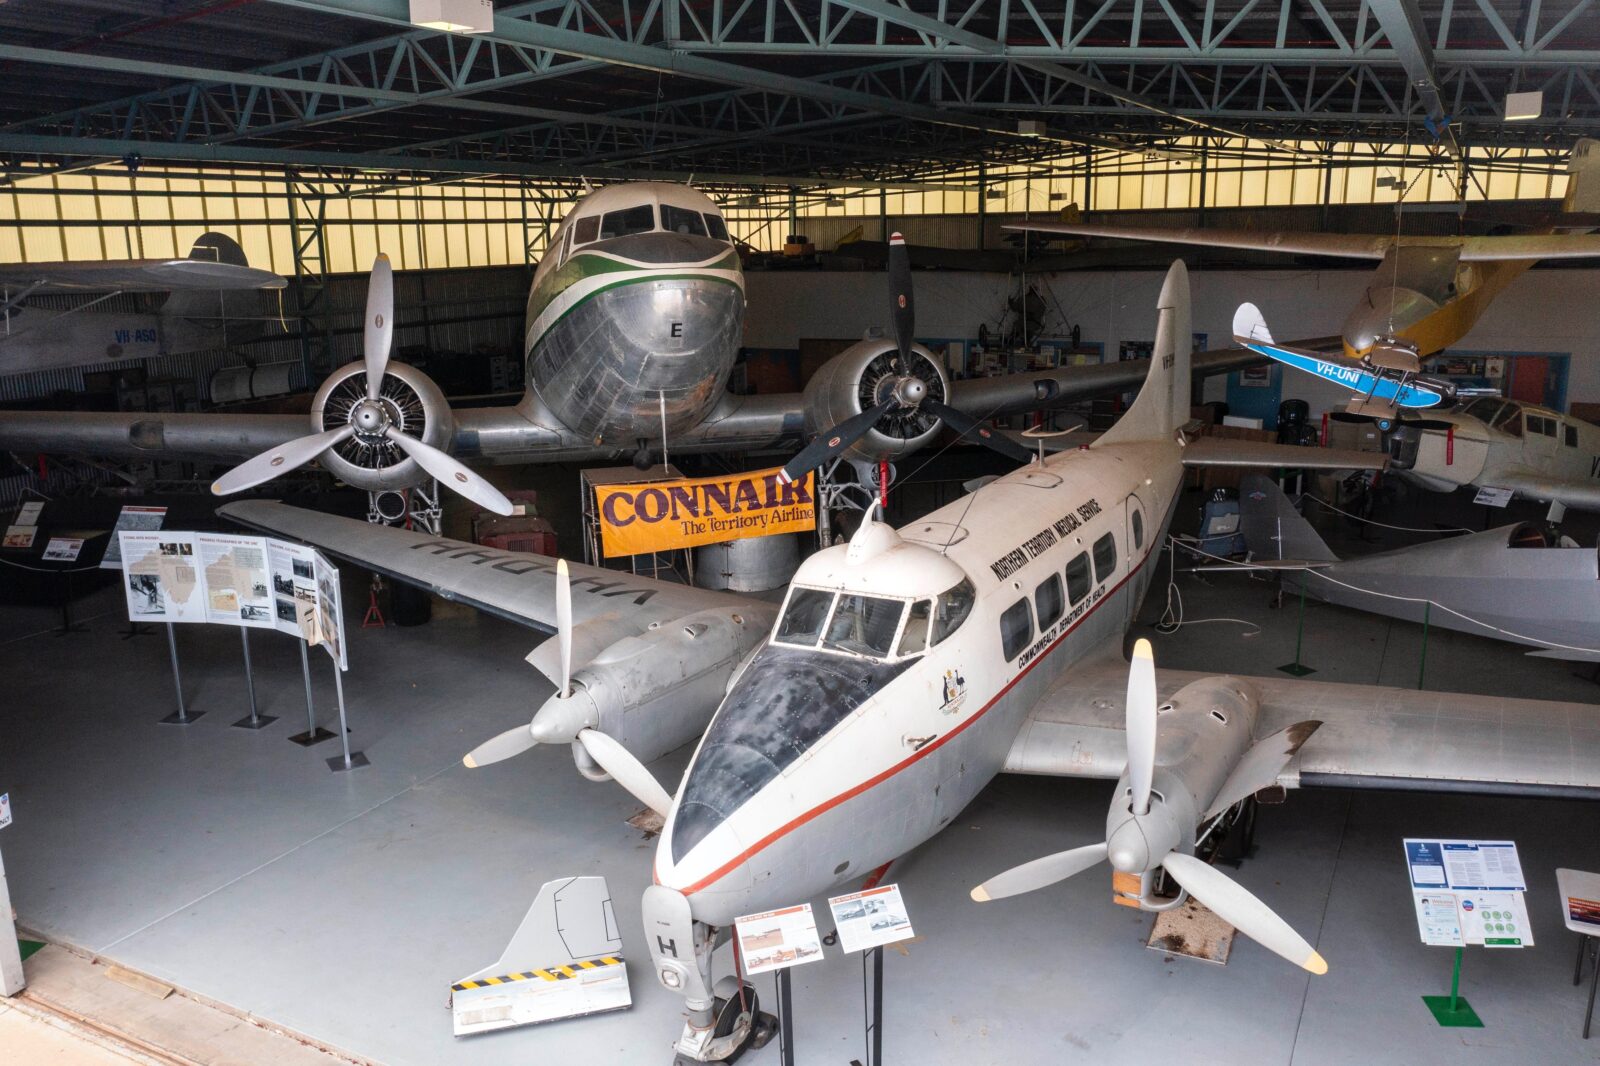 Aero Medical DOVE aircraft used for medical flights & DC3 used for evacuations